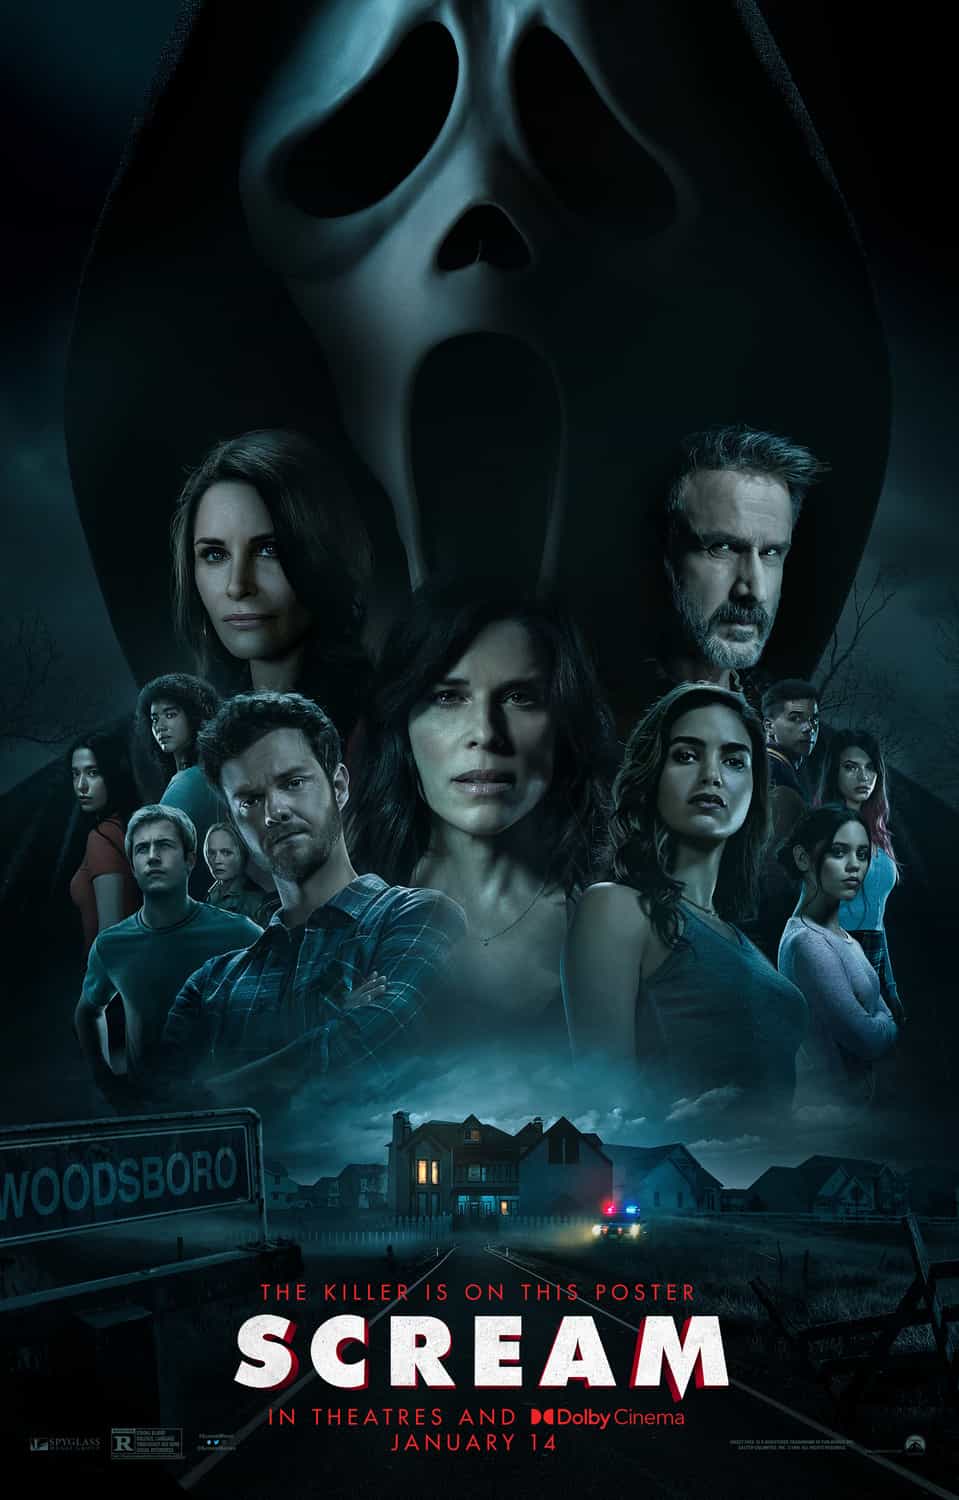 New poster released for Scream which stars Neve Campbell - the movie is released 14th January 2022 #scream